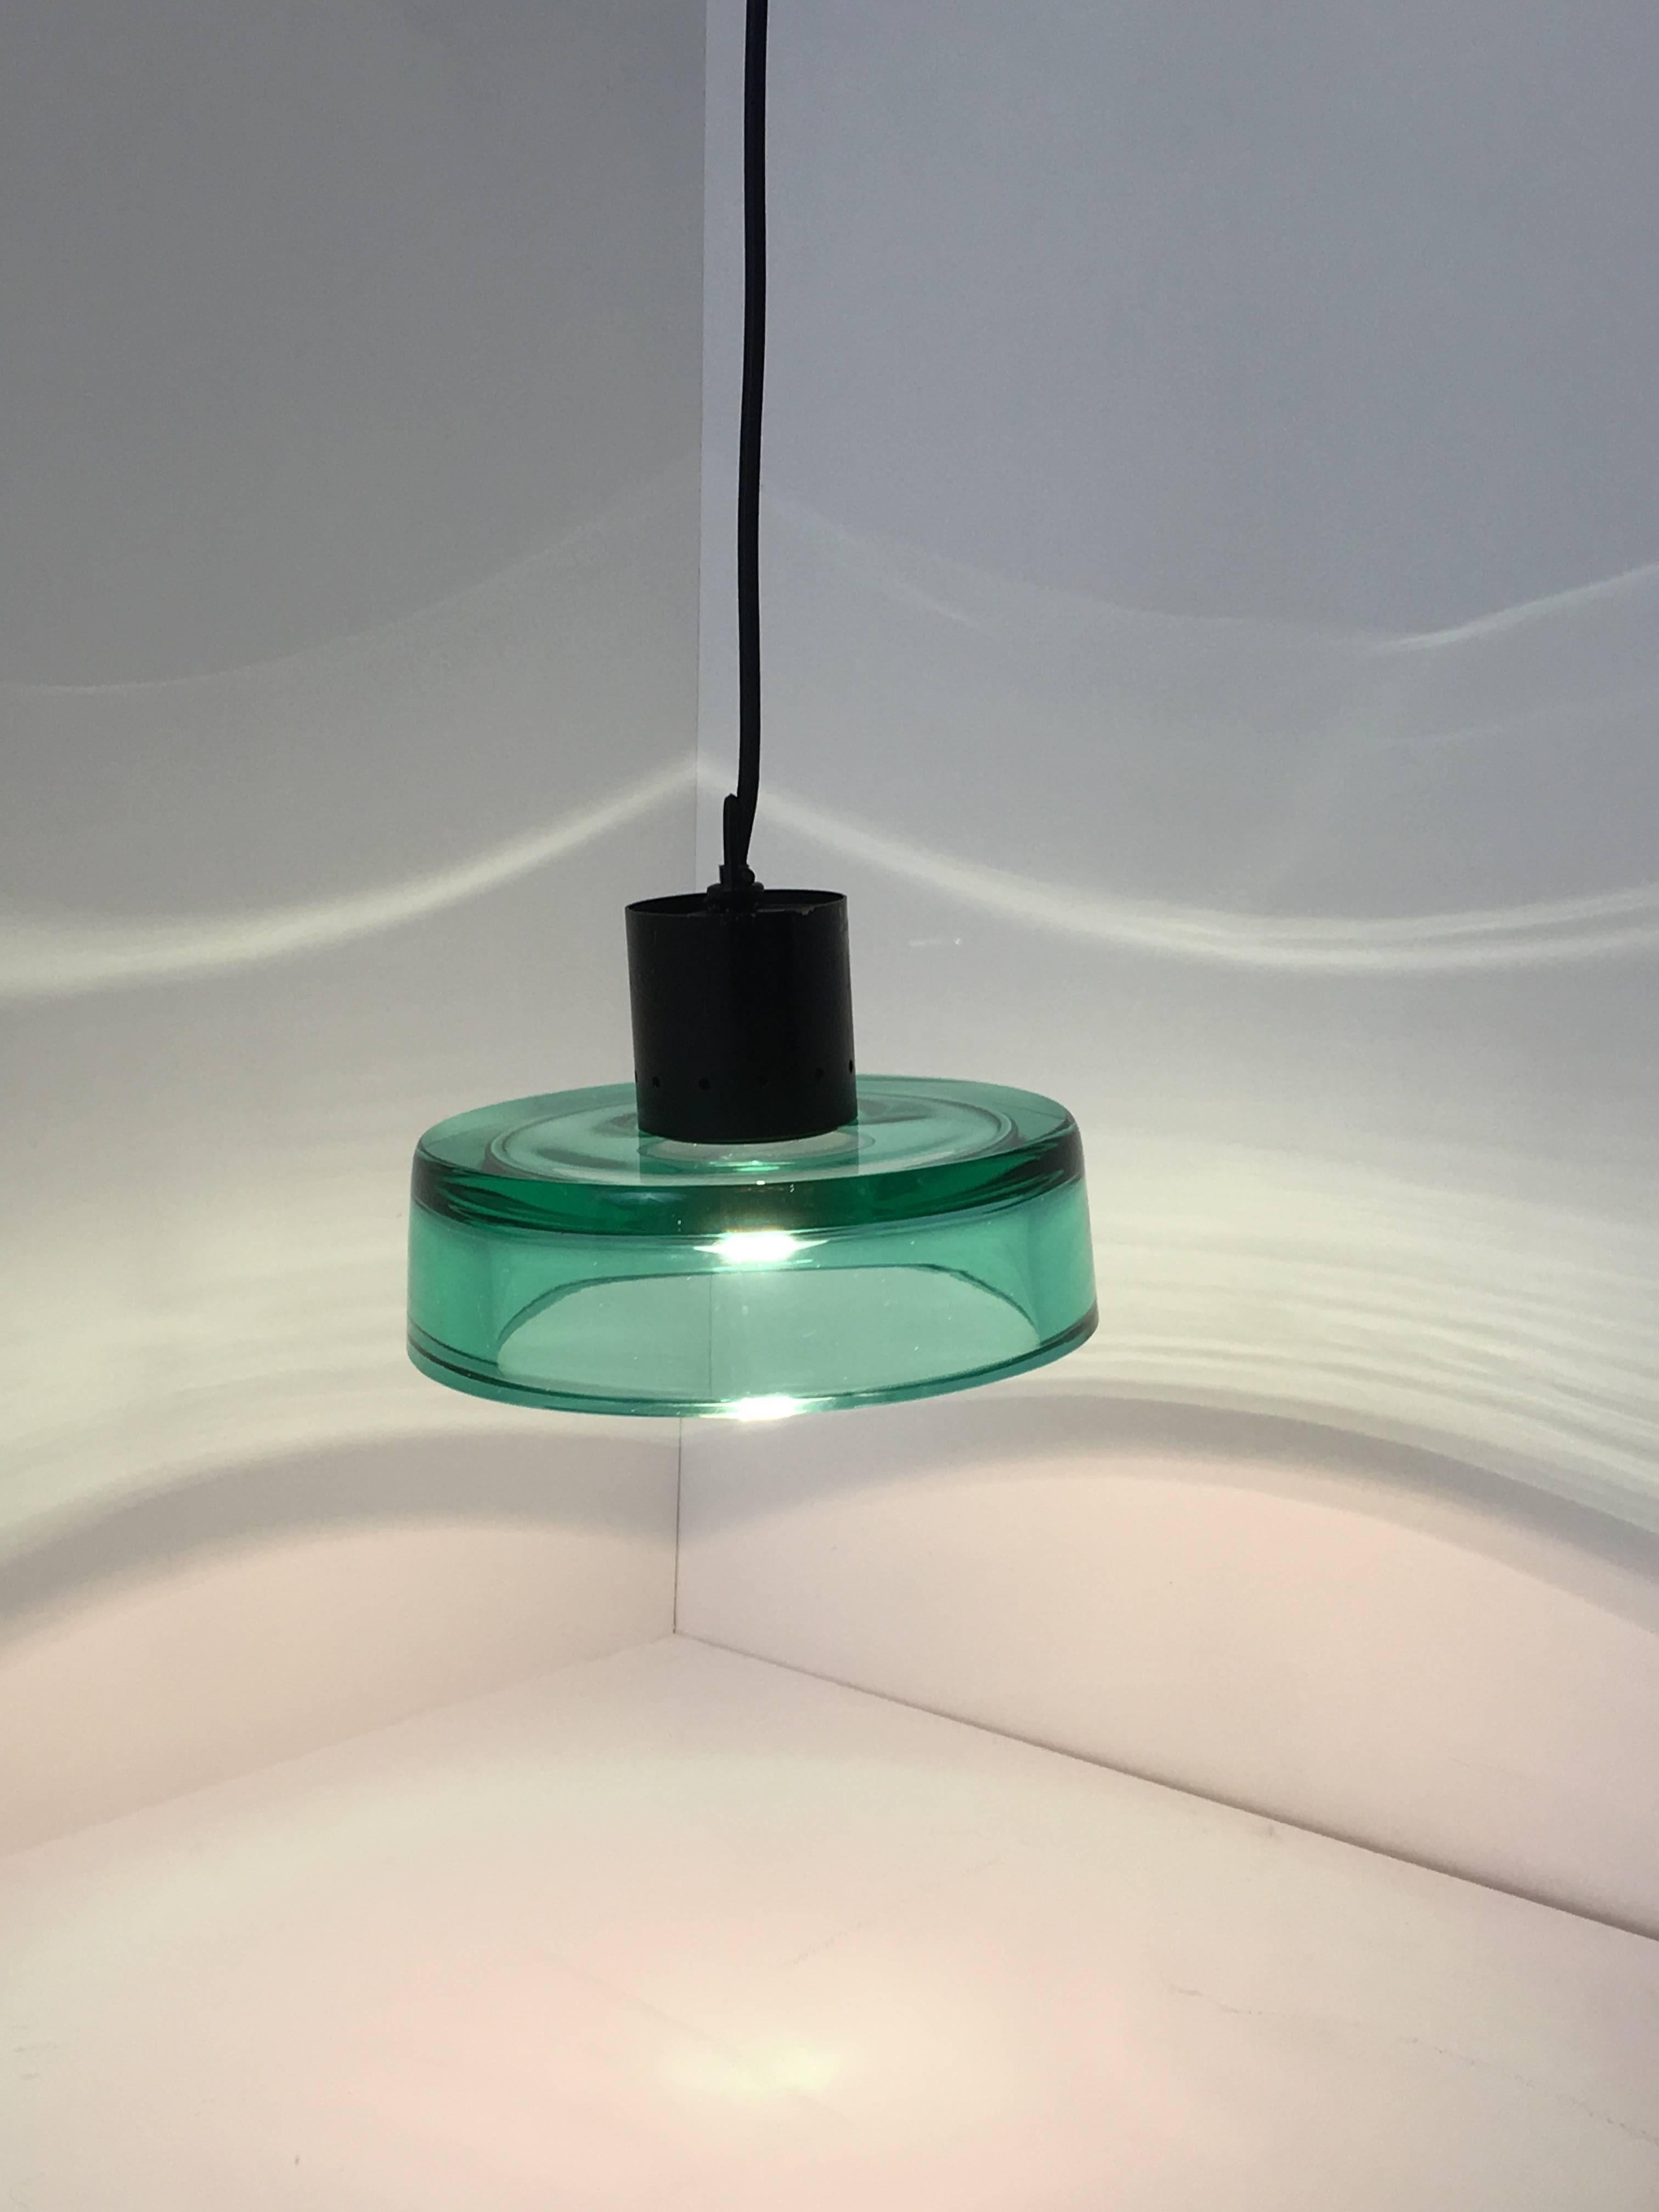 A beautiful, green glass ceiling pendant designed by Flavio Poli for Seguso, Murano. The black lacquered brass fitting is cleverly attached to the solid glass shade and when lit has a clean, luminous quality. Re-wired with black fabric flex.